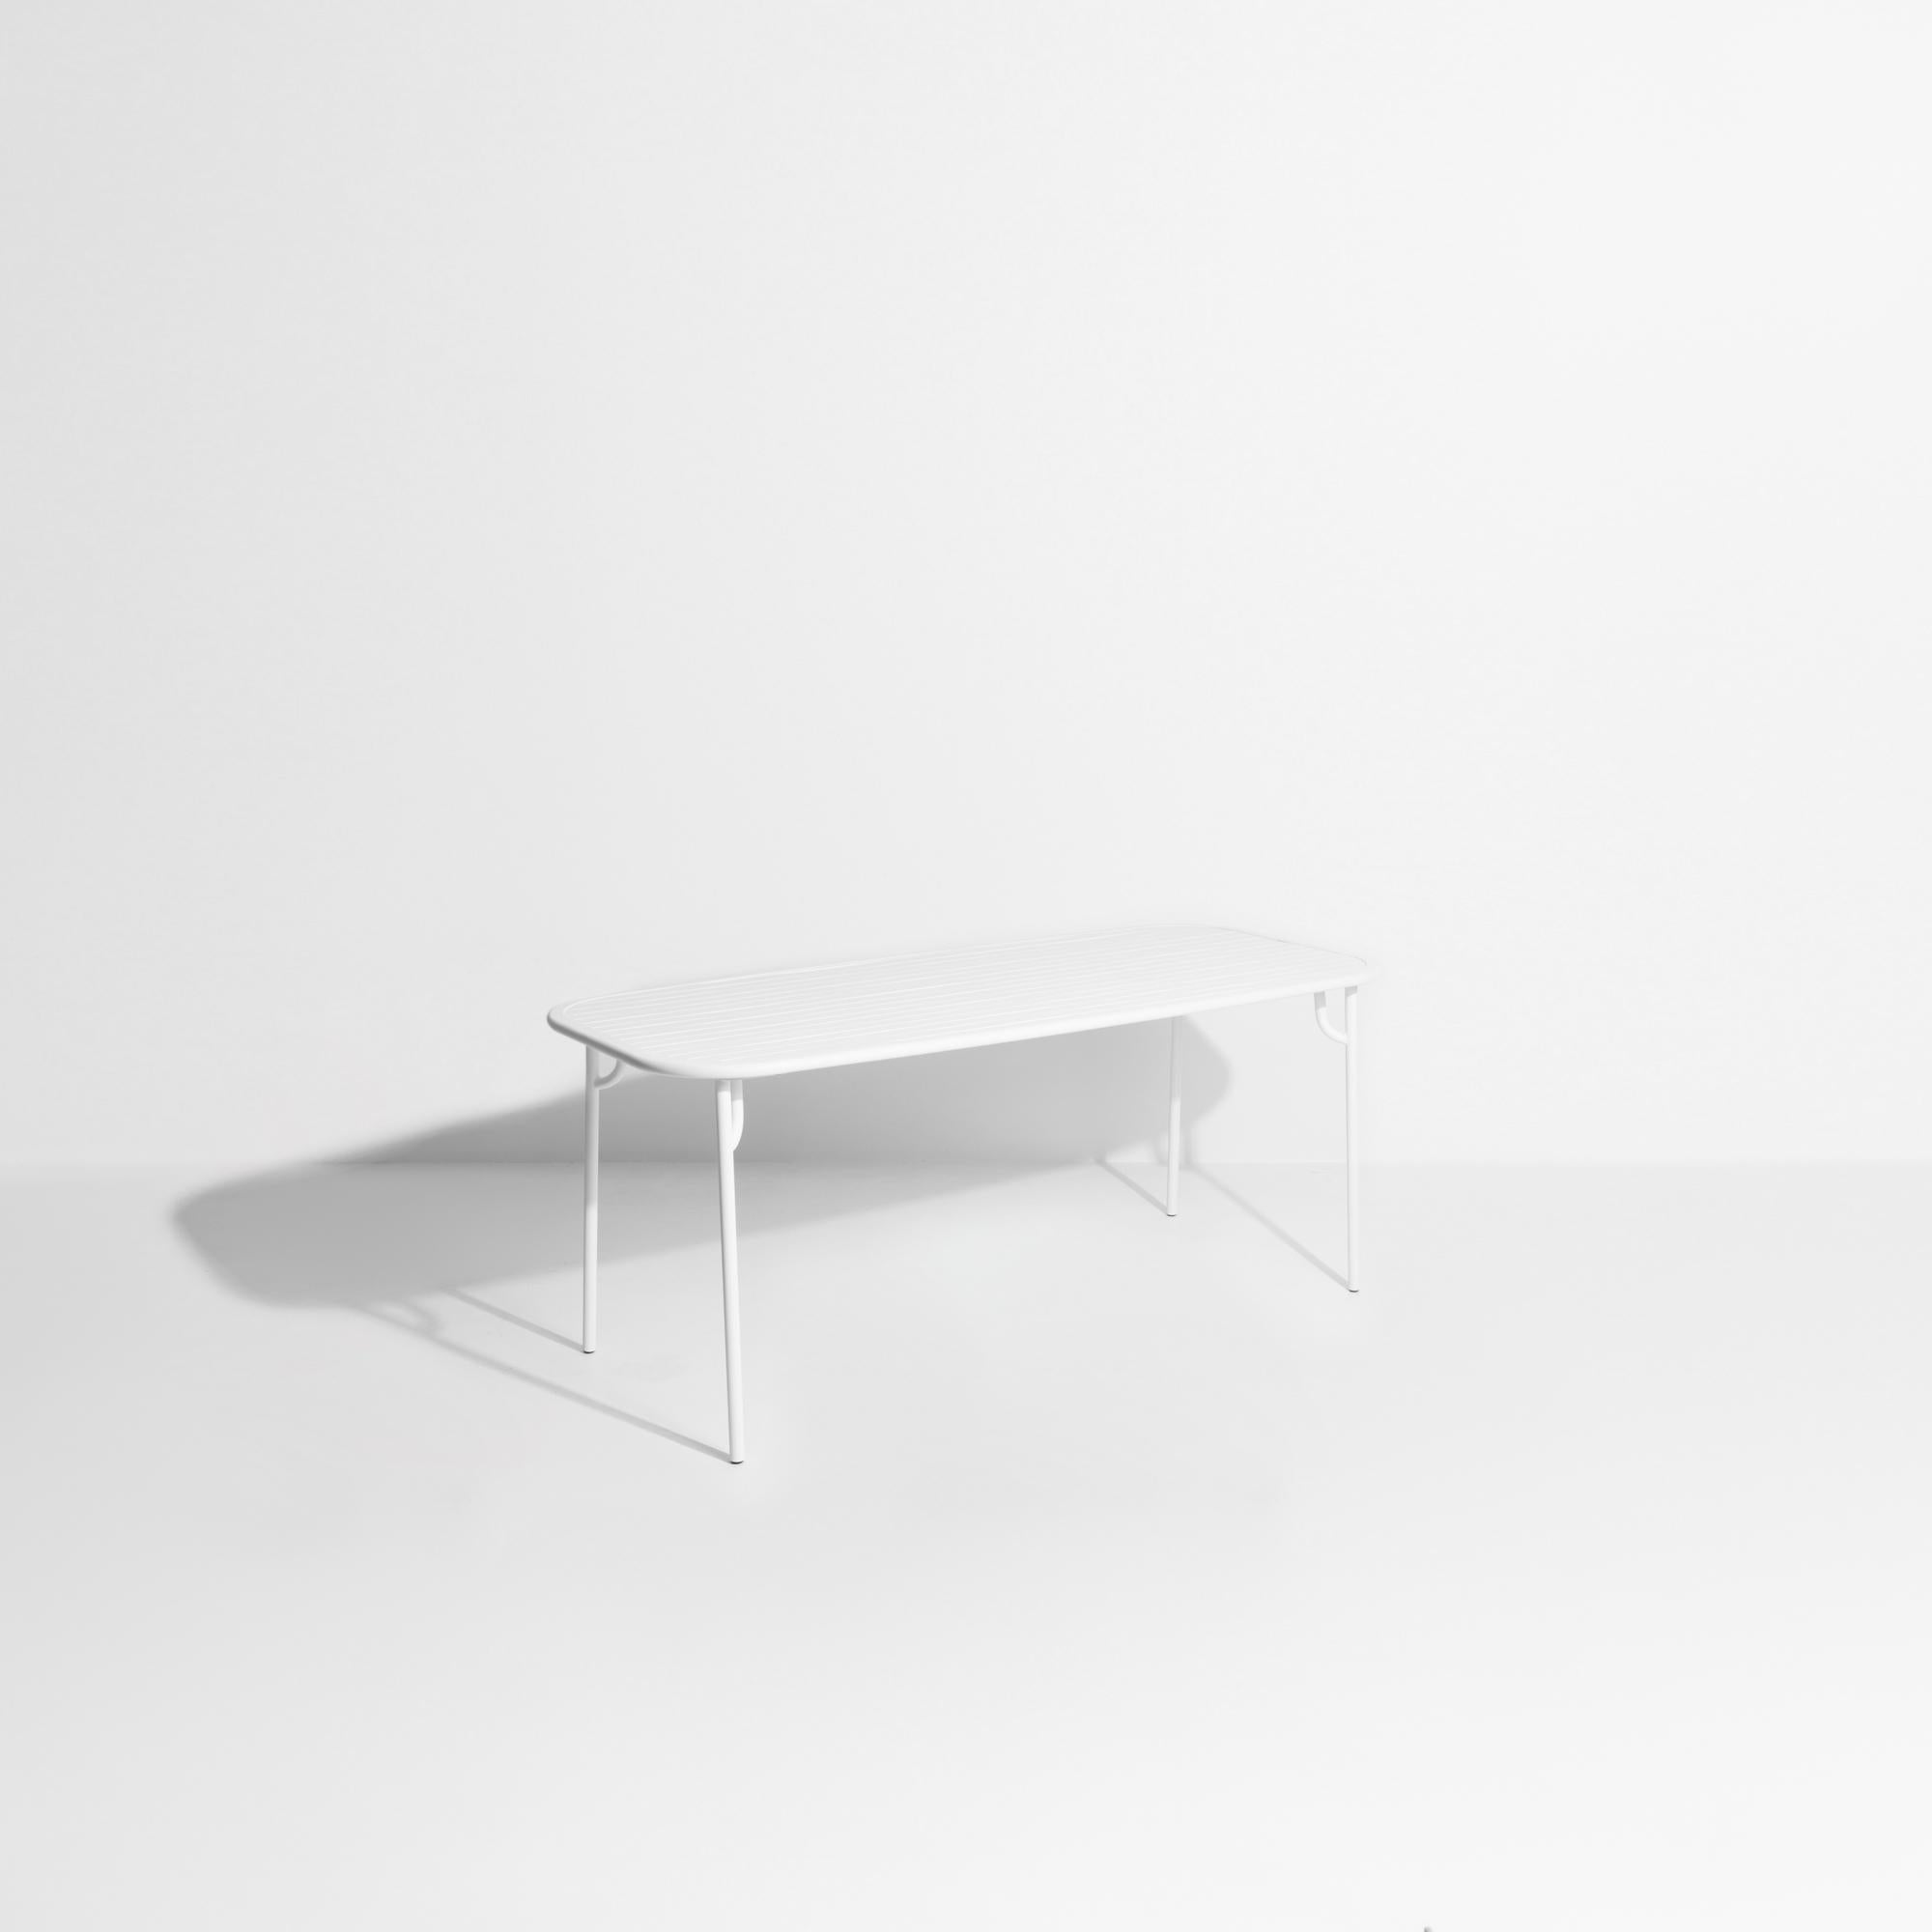 Petite Friture Week-End Medium Rectangular Dining Table in White Aluminium with Slats by Studio BrichetZiegler, 2017

The week-end collection is a full range of outdoor furniture, in aluminium grained epoxy paint, matt finish, that includes 18